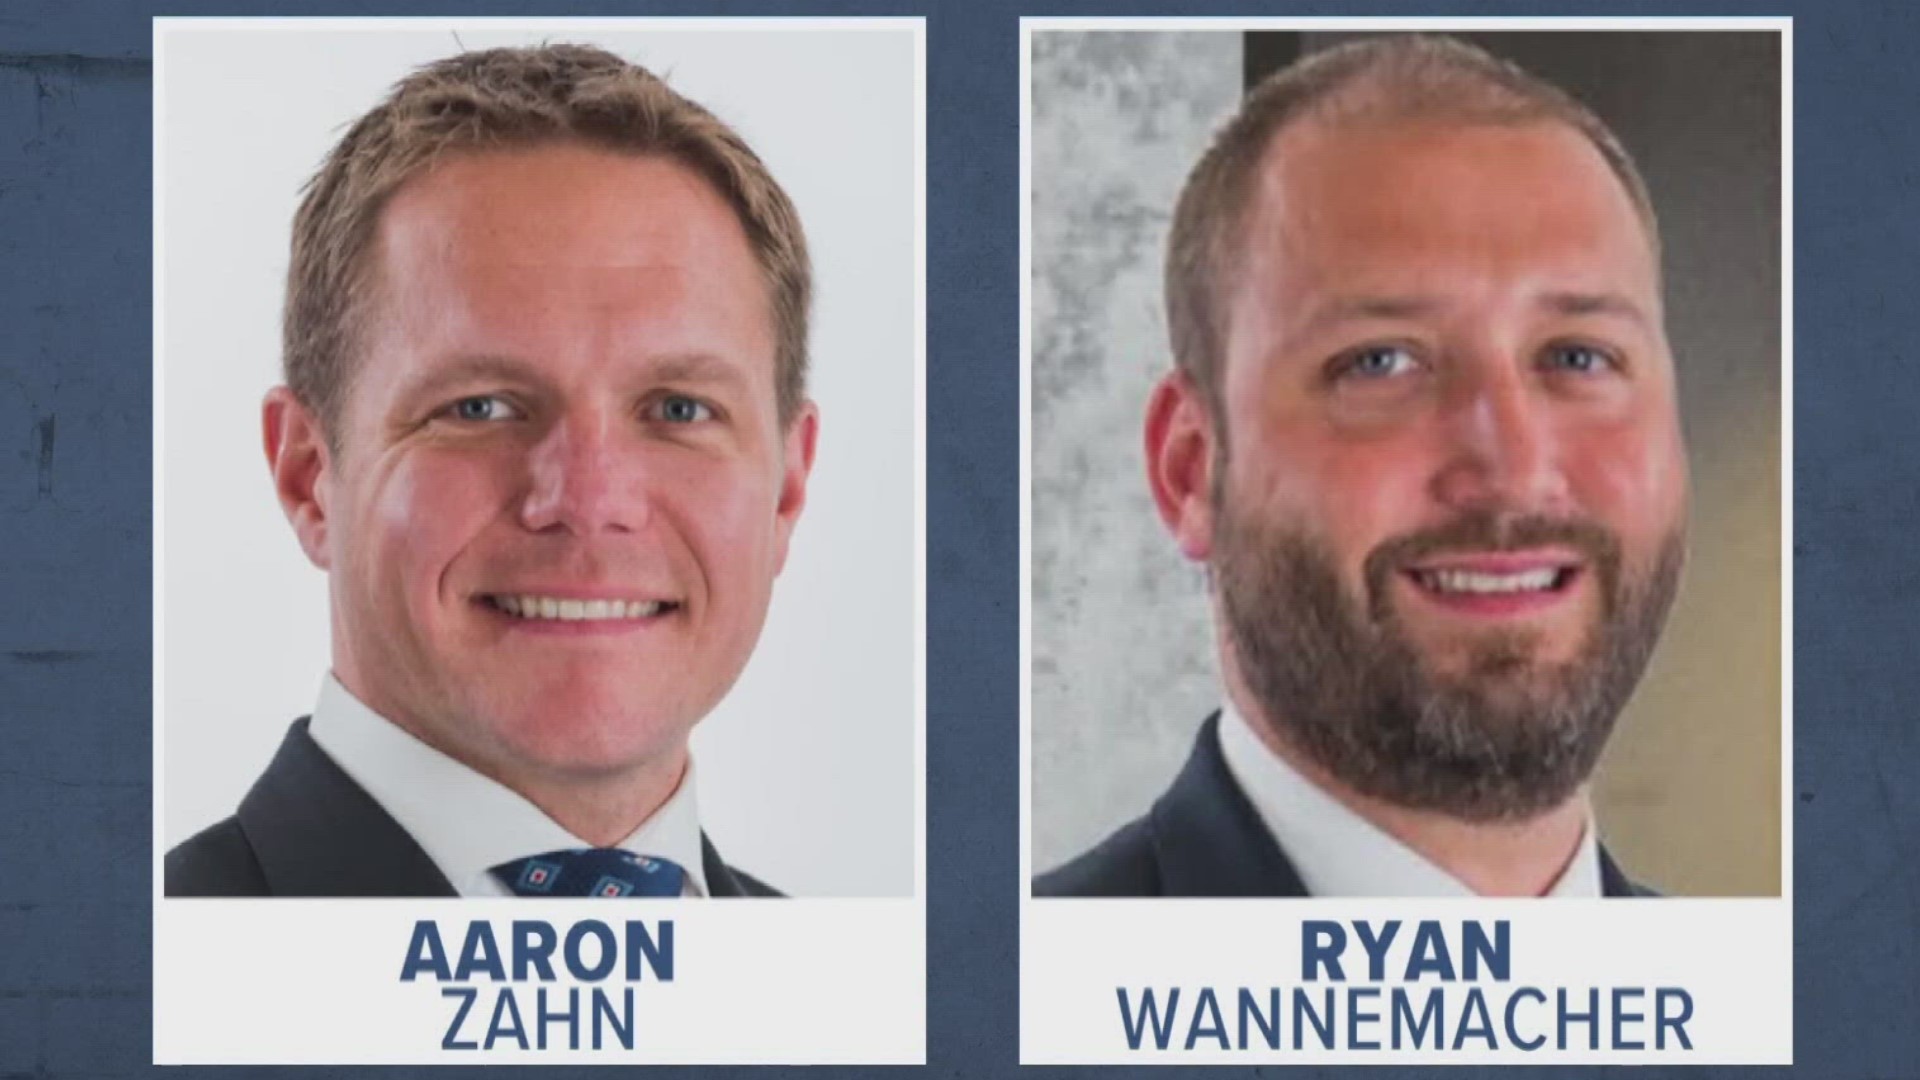 Ex-JEA CEO Aaron Zahn and ex-JEA CFO Ryan Wannamacher are accused of crafting a plot to privatize and sell JEA and skim millions in profits off the top.